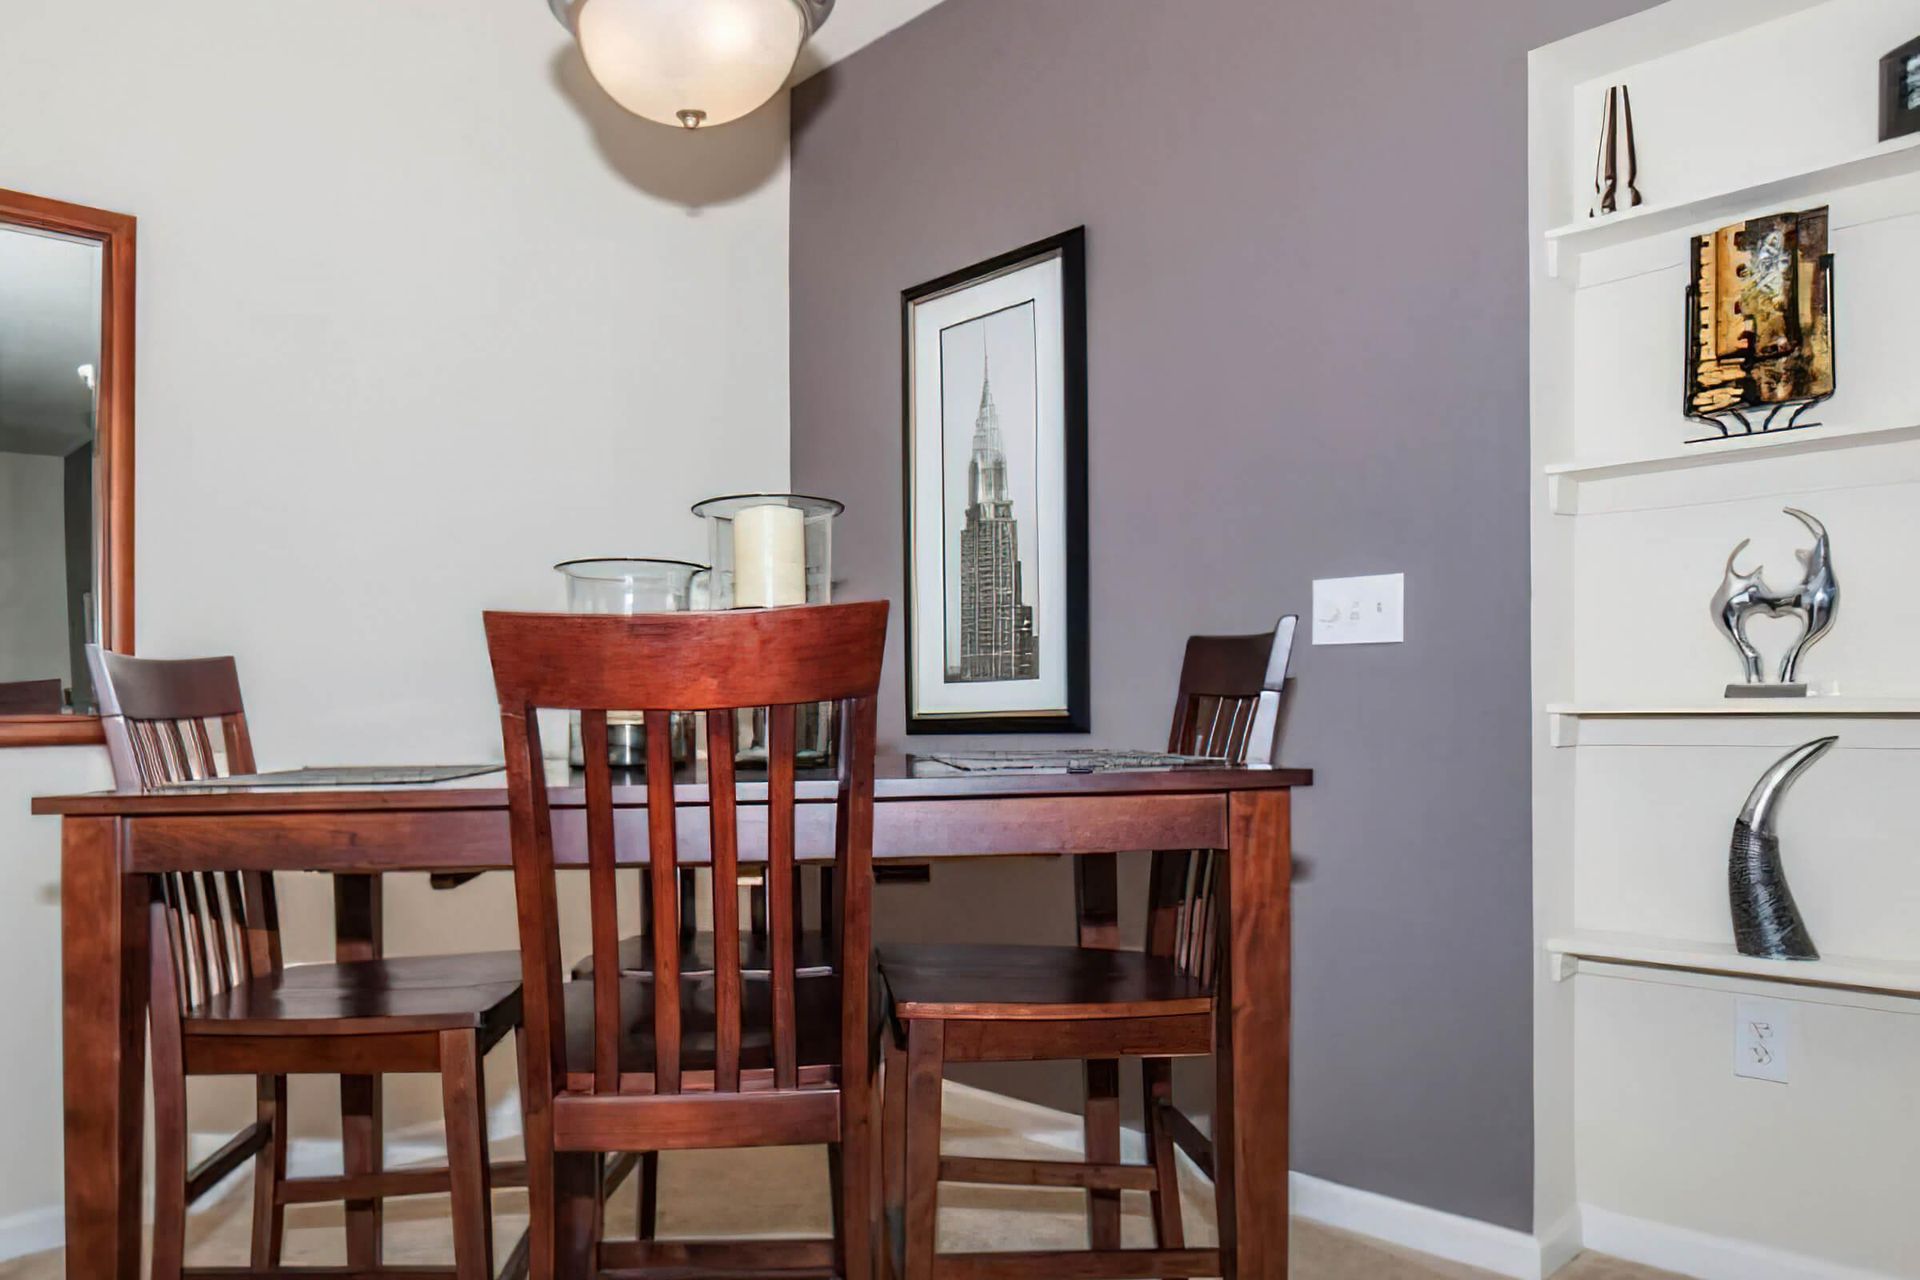 Echo Ridge apartment dining room with dining table, chairs, wall art, and designer lighting.